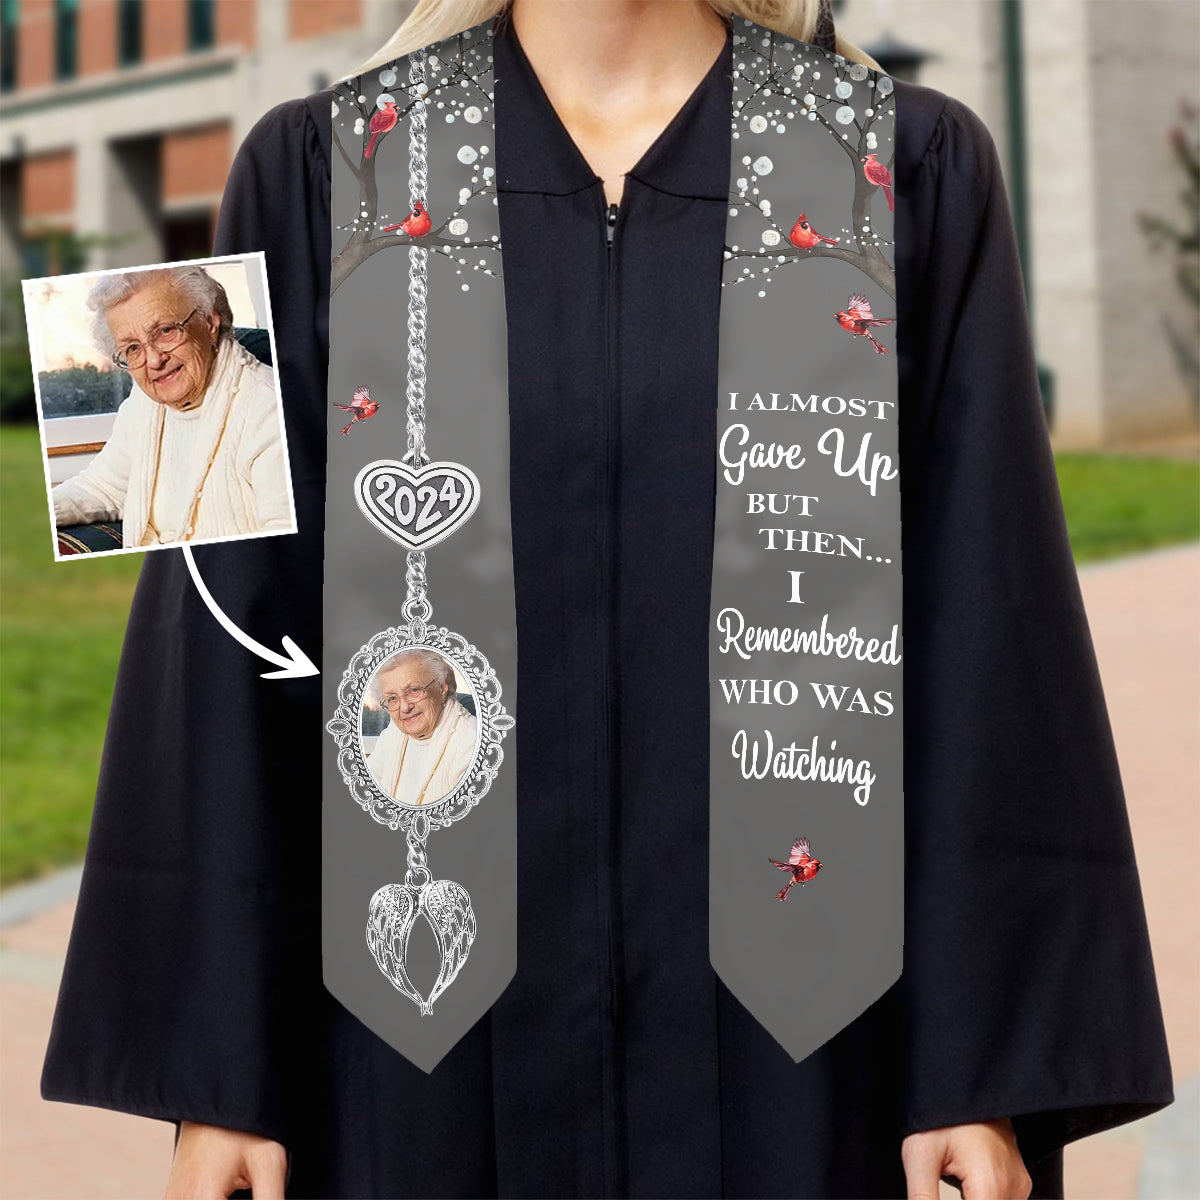 I Almost Gave Up But Then I Remembered Who Was Watching - Personalized Graduation Graduation Stole